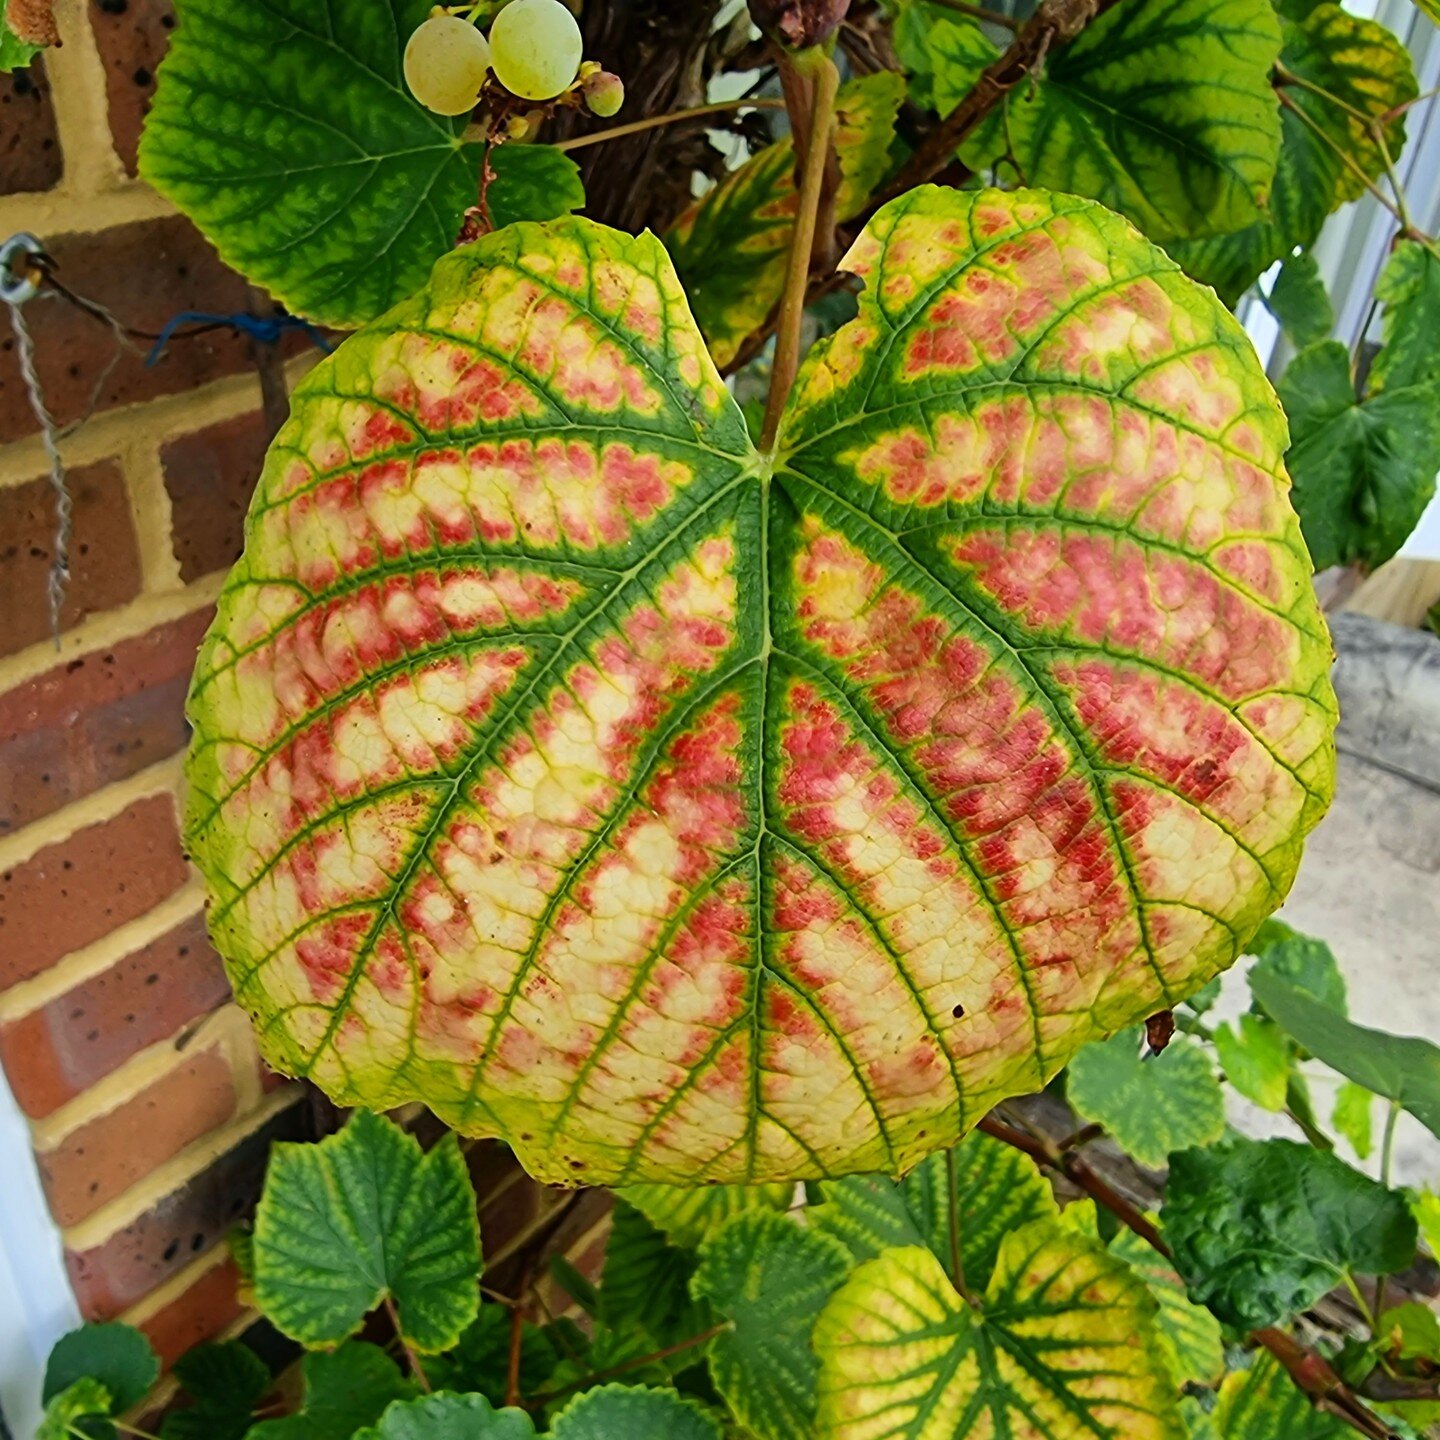 Amazing colour contrast and patterns on this (grape)vine leaf as it readies itself for autumn.